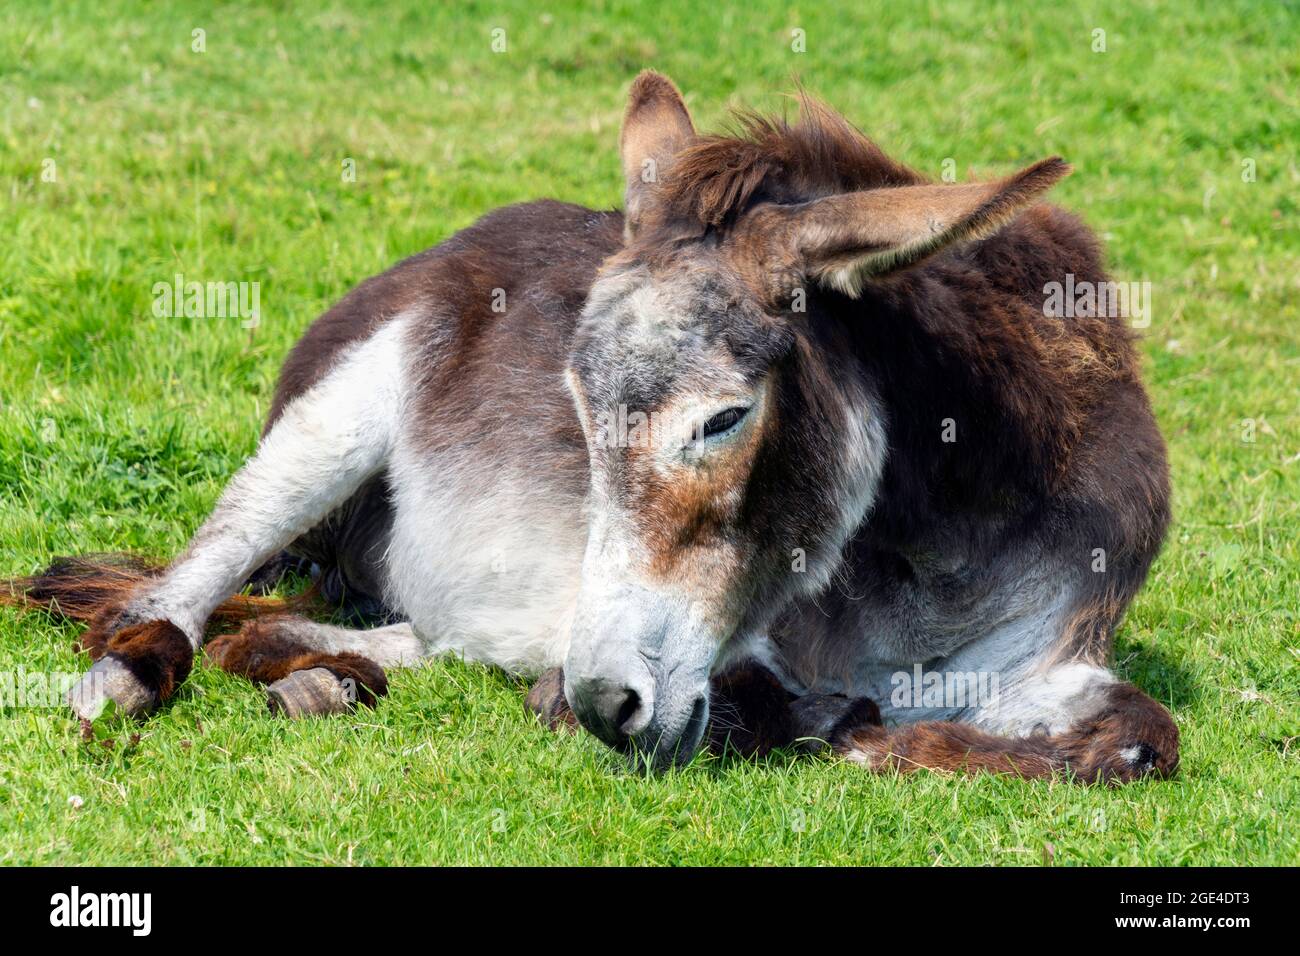 An old donkey lying down and taking it easy in the sunshine. The donkey is resting and sleeping in a very relaxed manner in his retirement years. Stock Photo